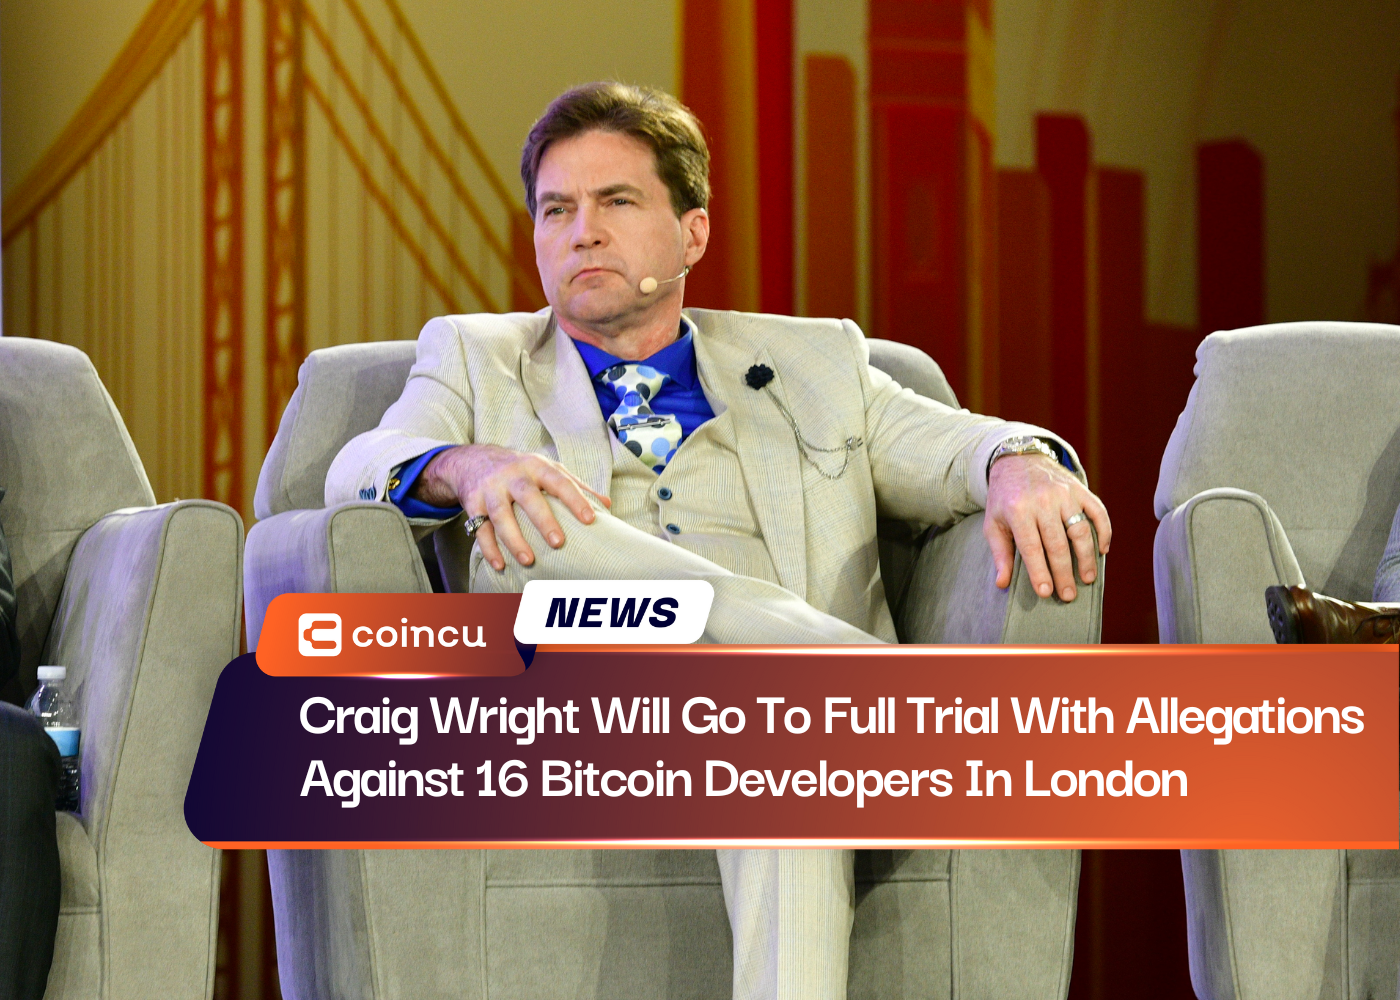 Craig Wright Will Go To Full Trial With Allegations Against 16 Bitcoin Developers In London